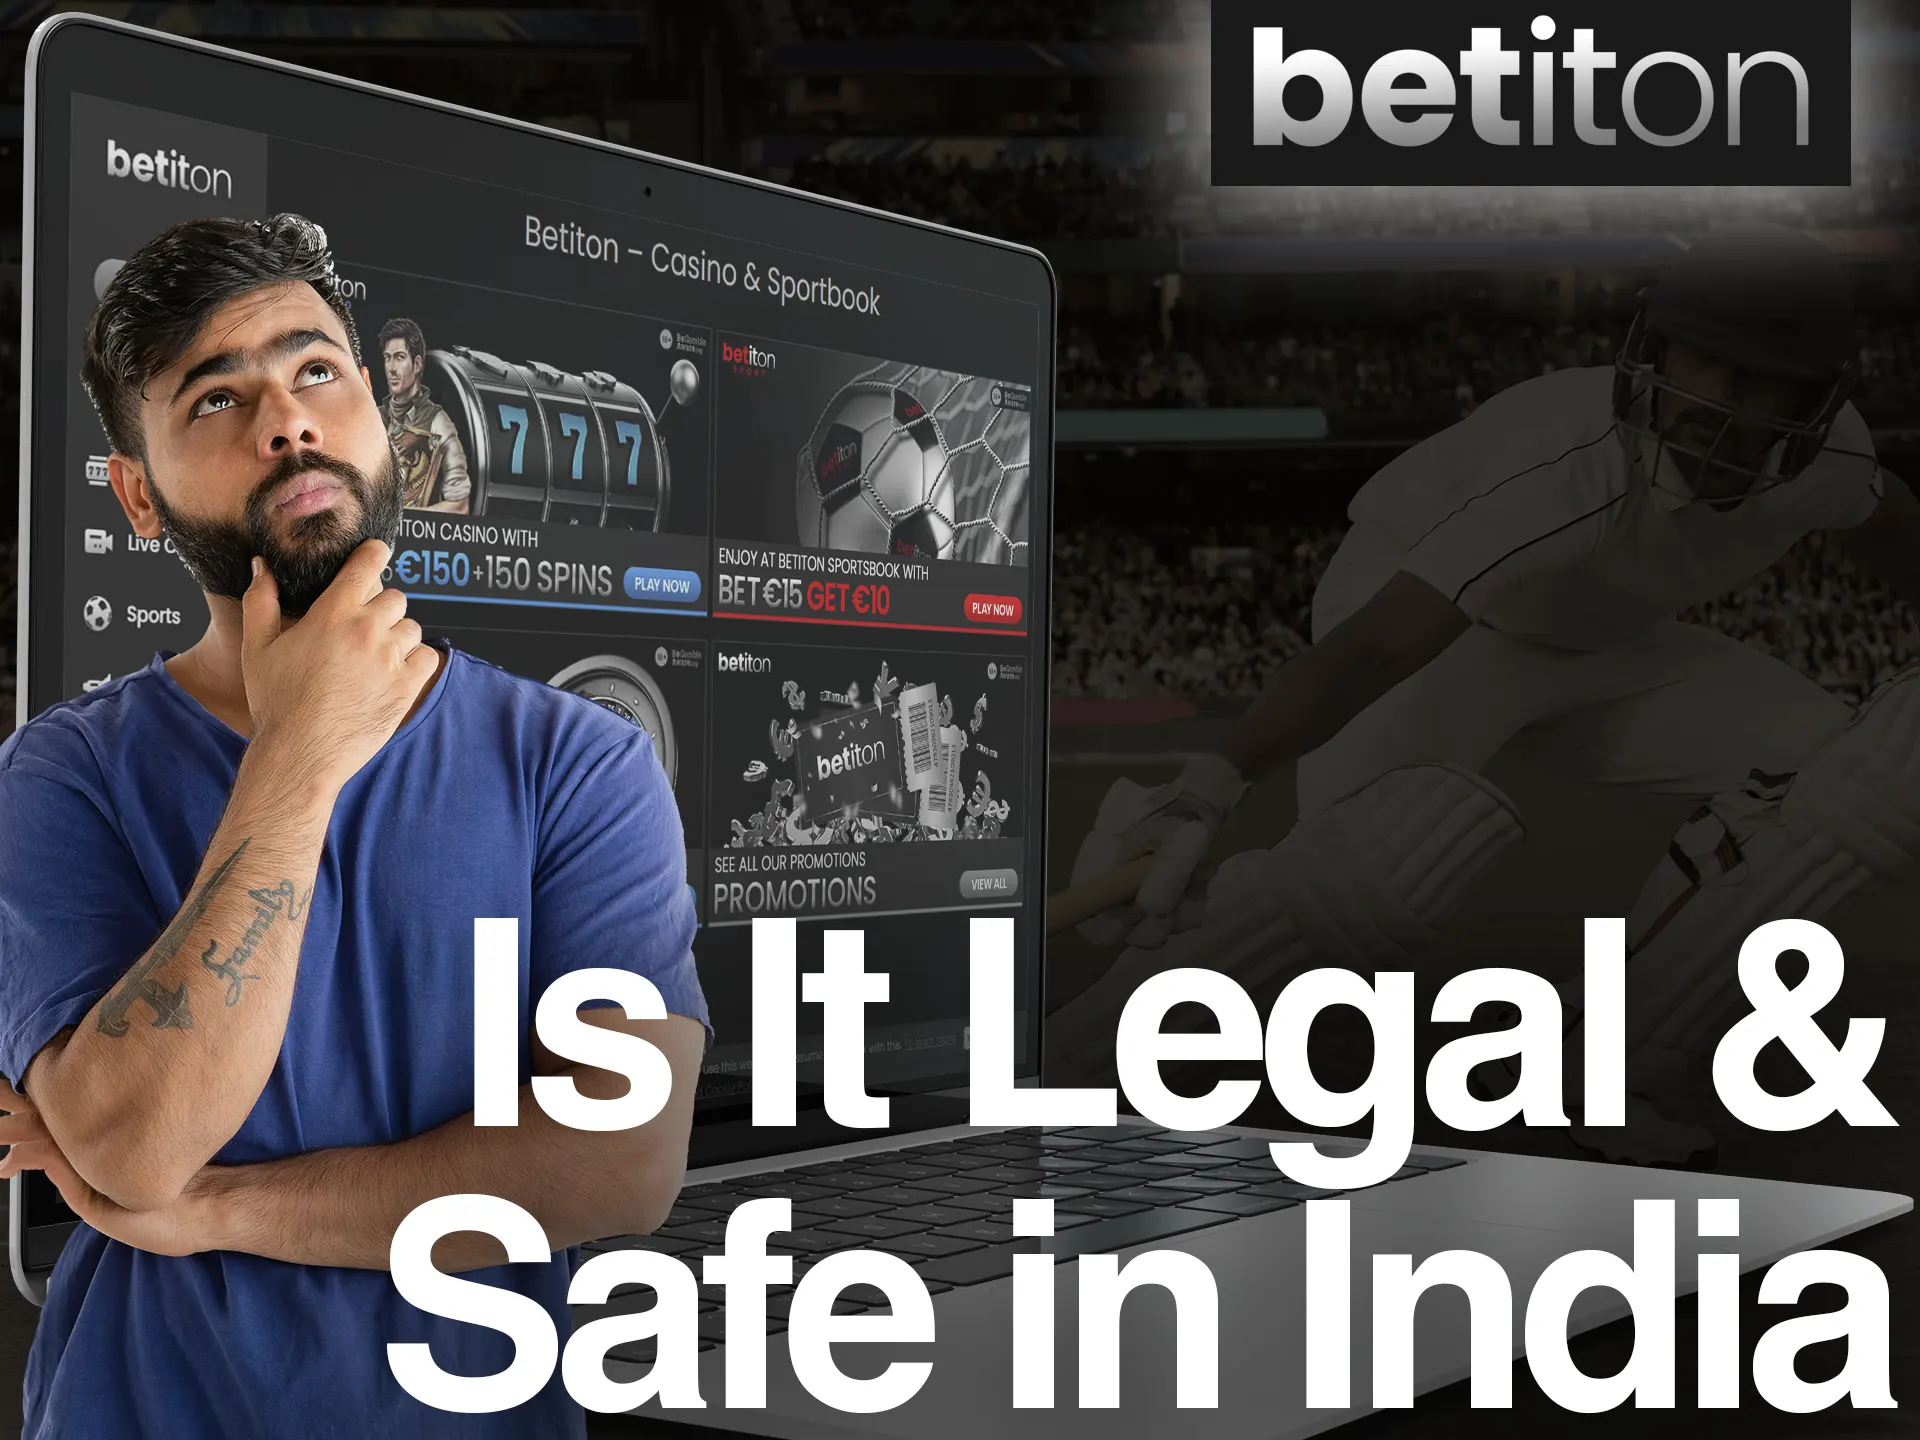 Betiton is a fully legal betting company in India.